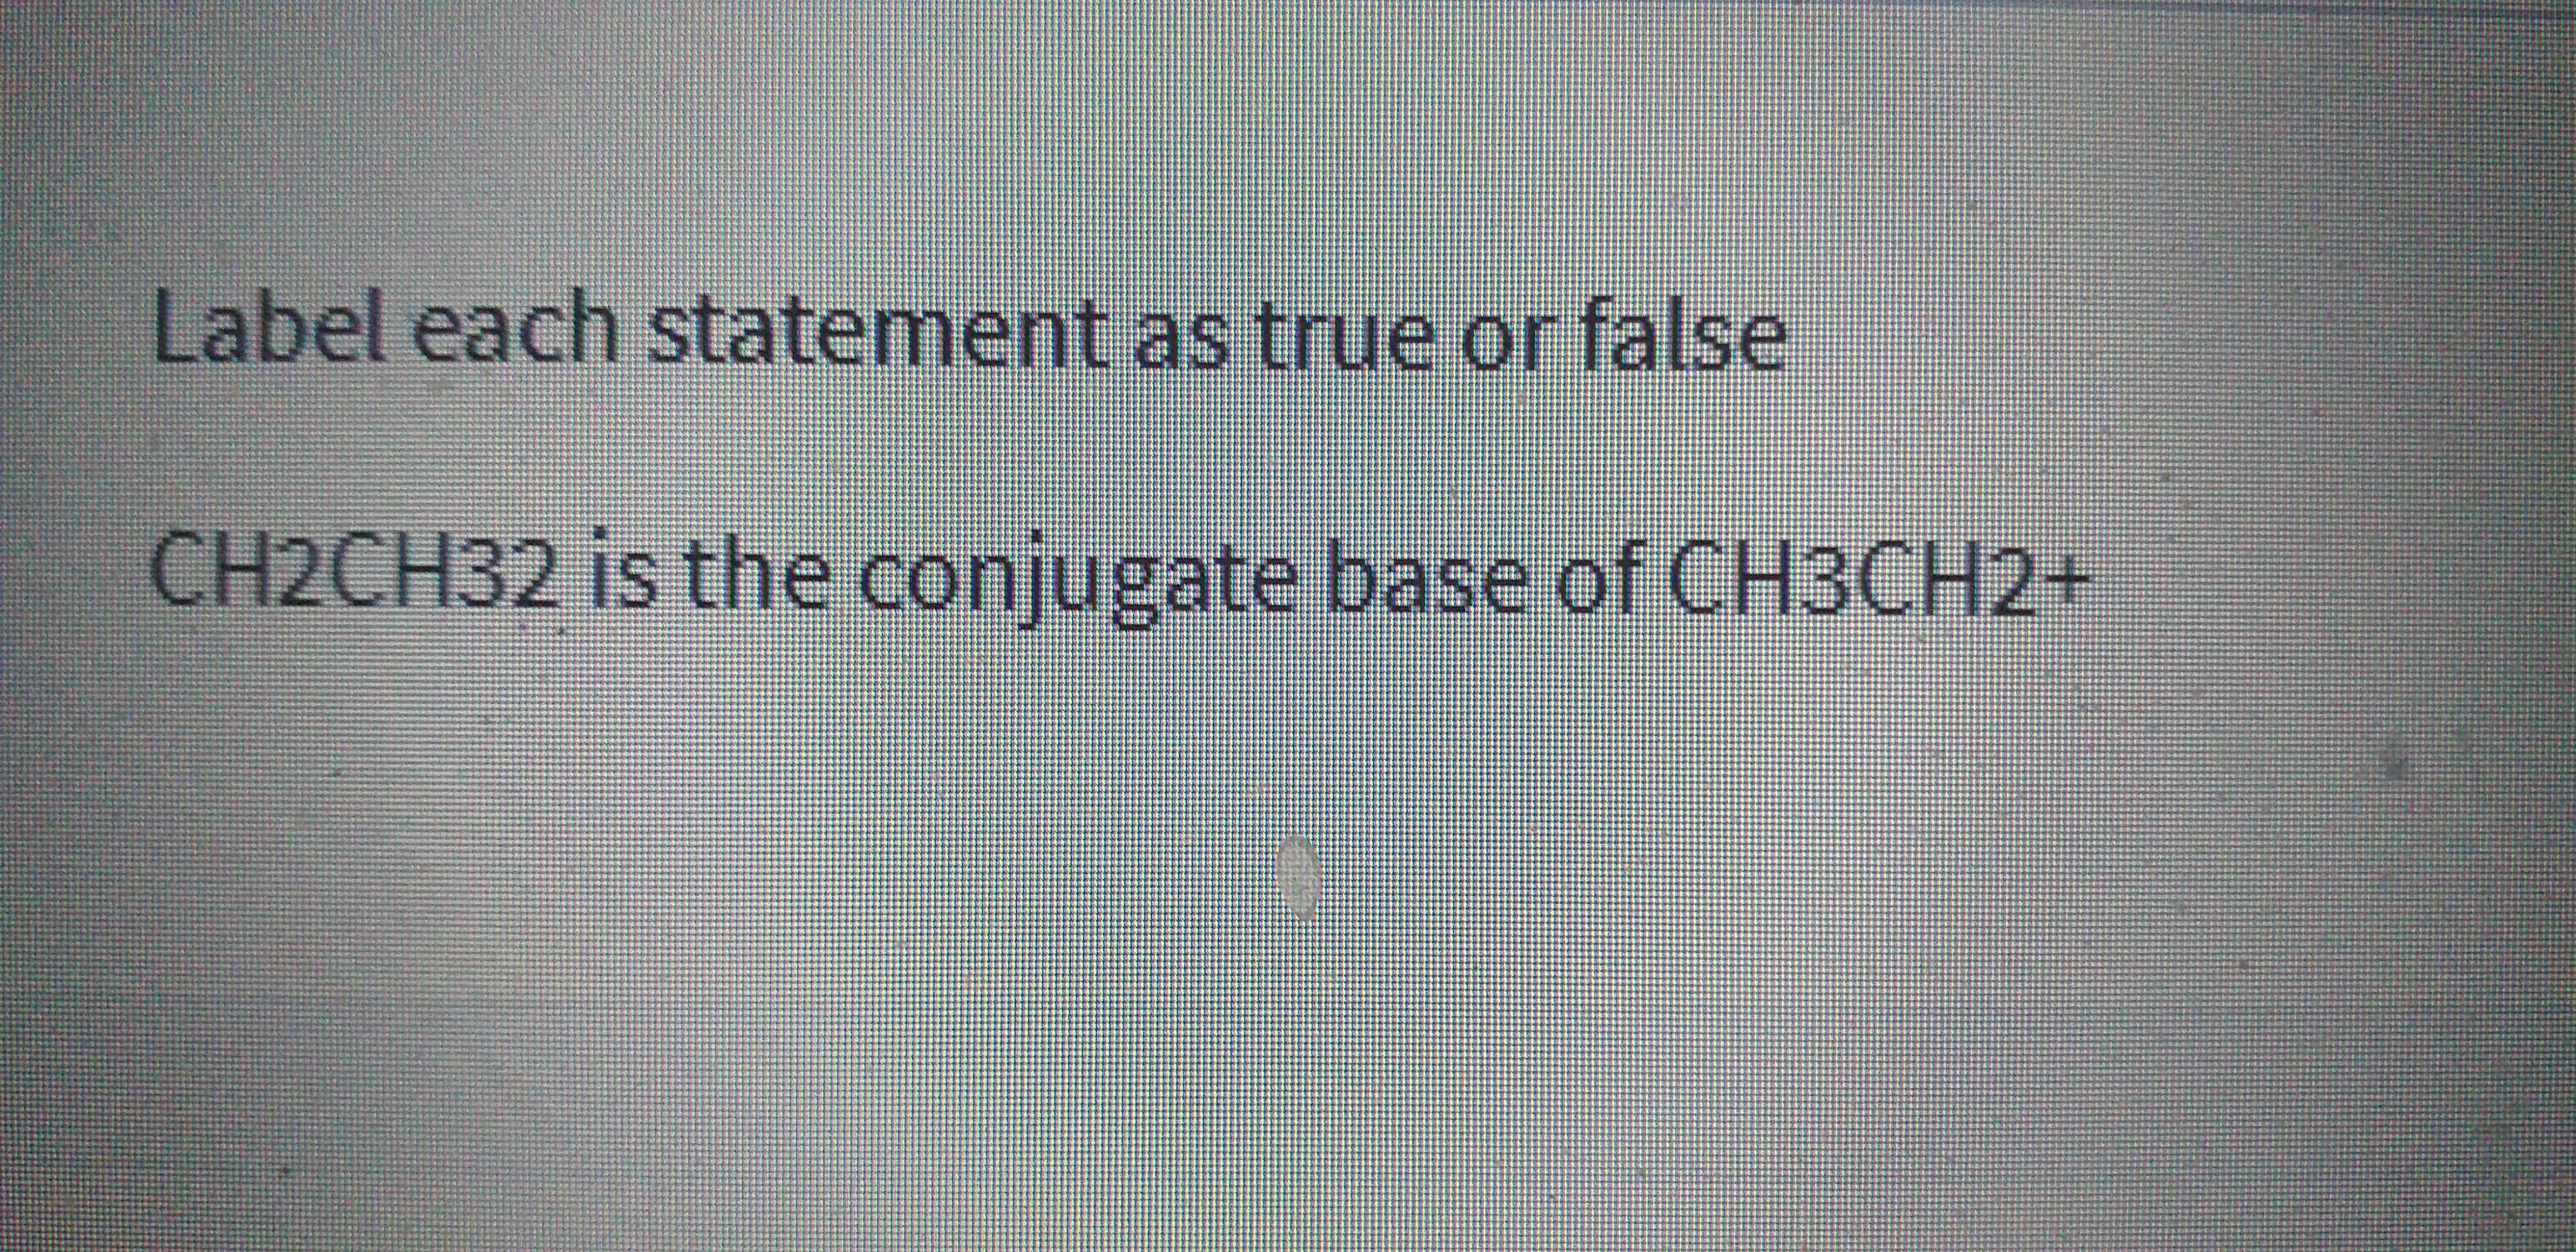 Label each statement as true or false
H2CH32 is the conjugate base of CH3CH2+
